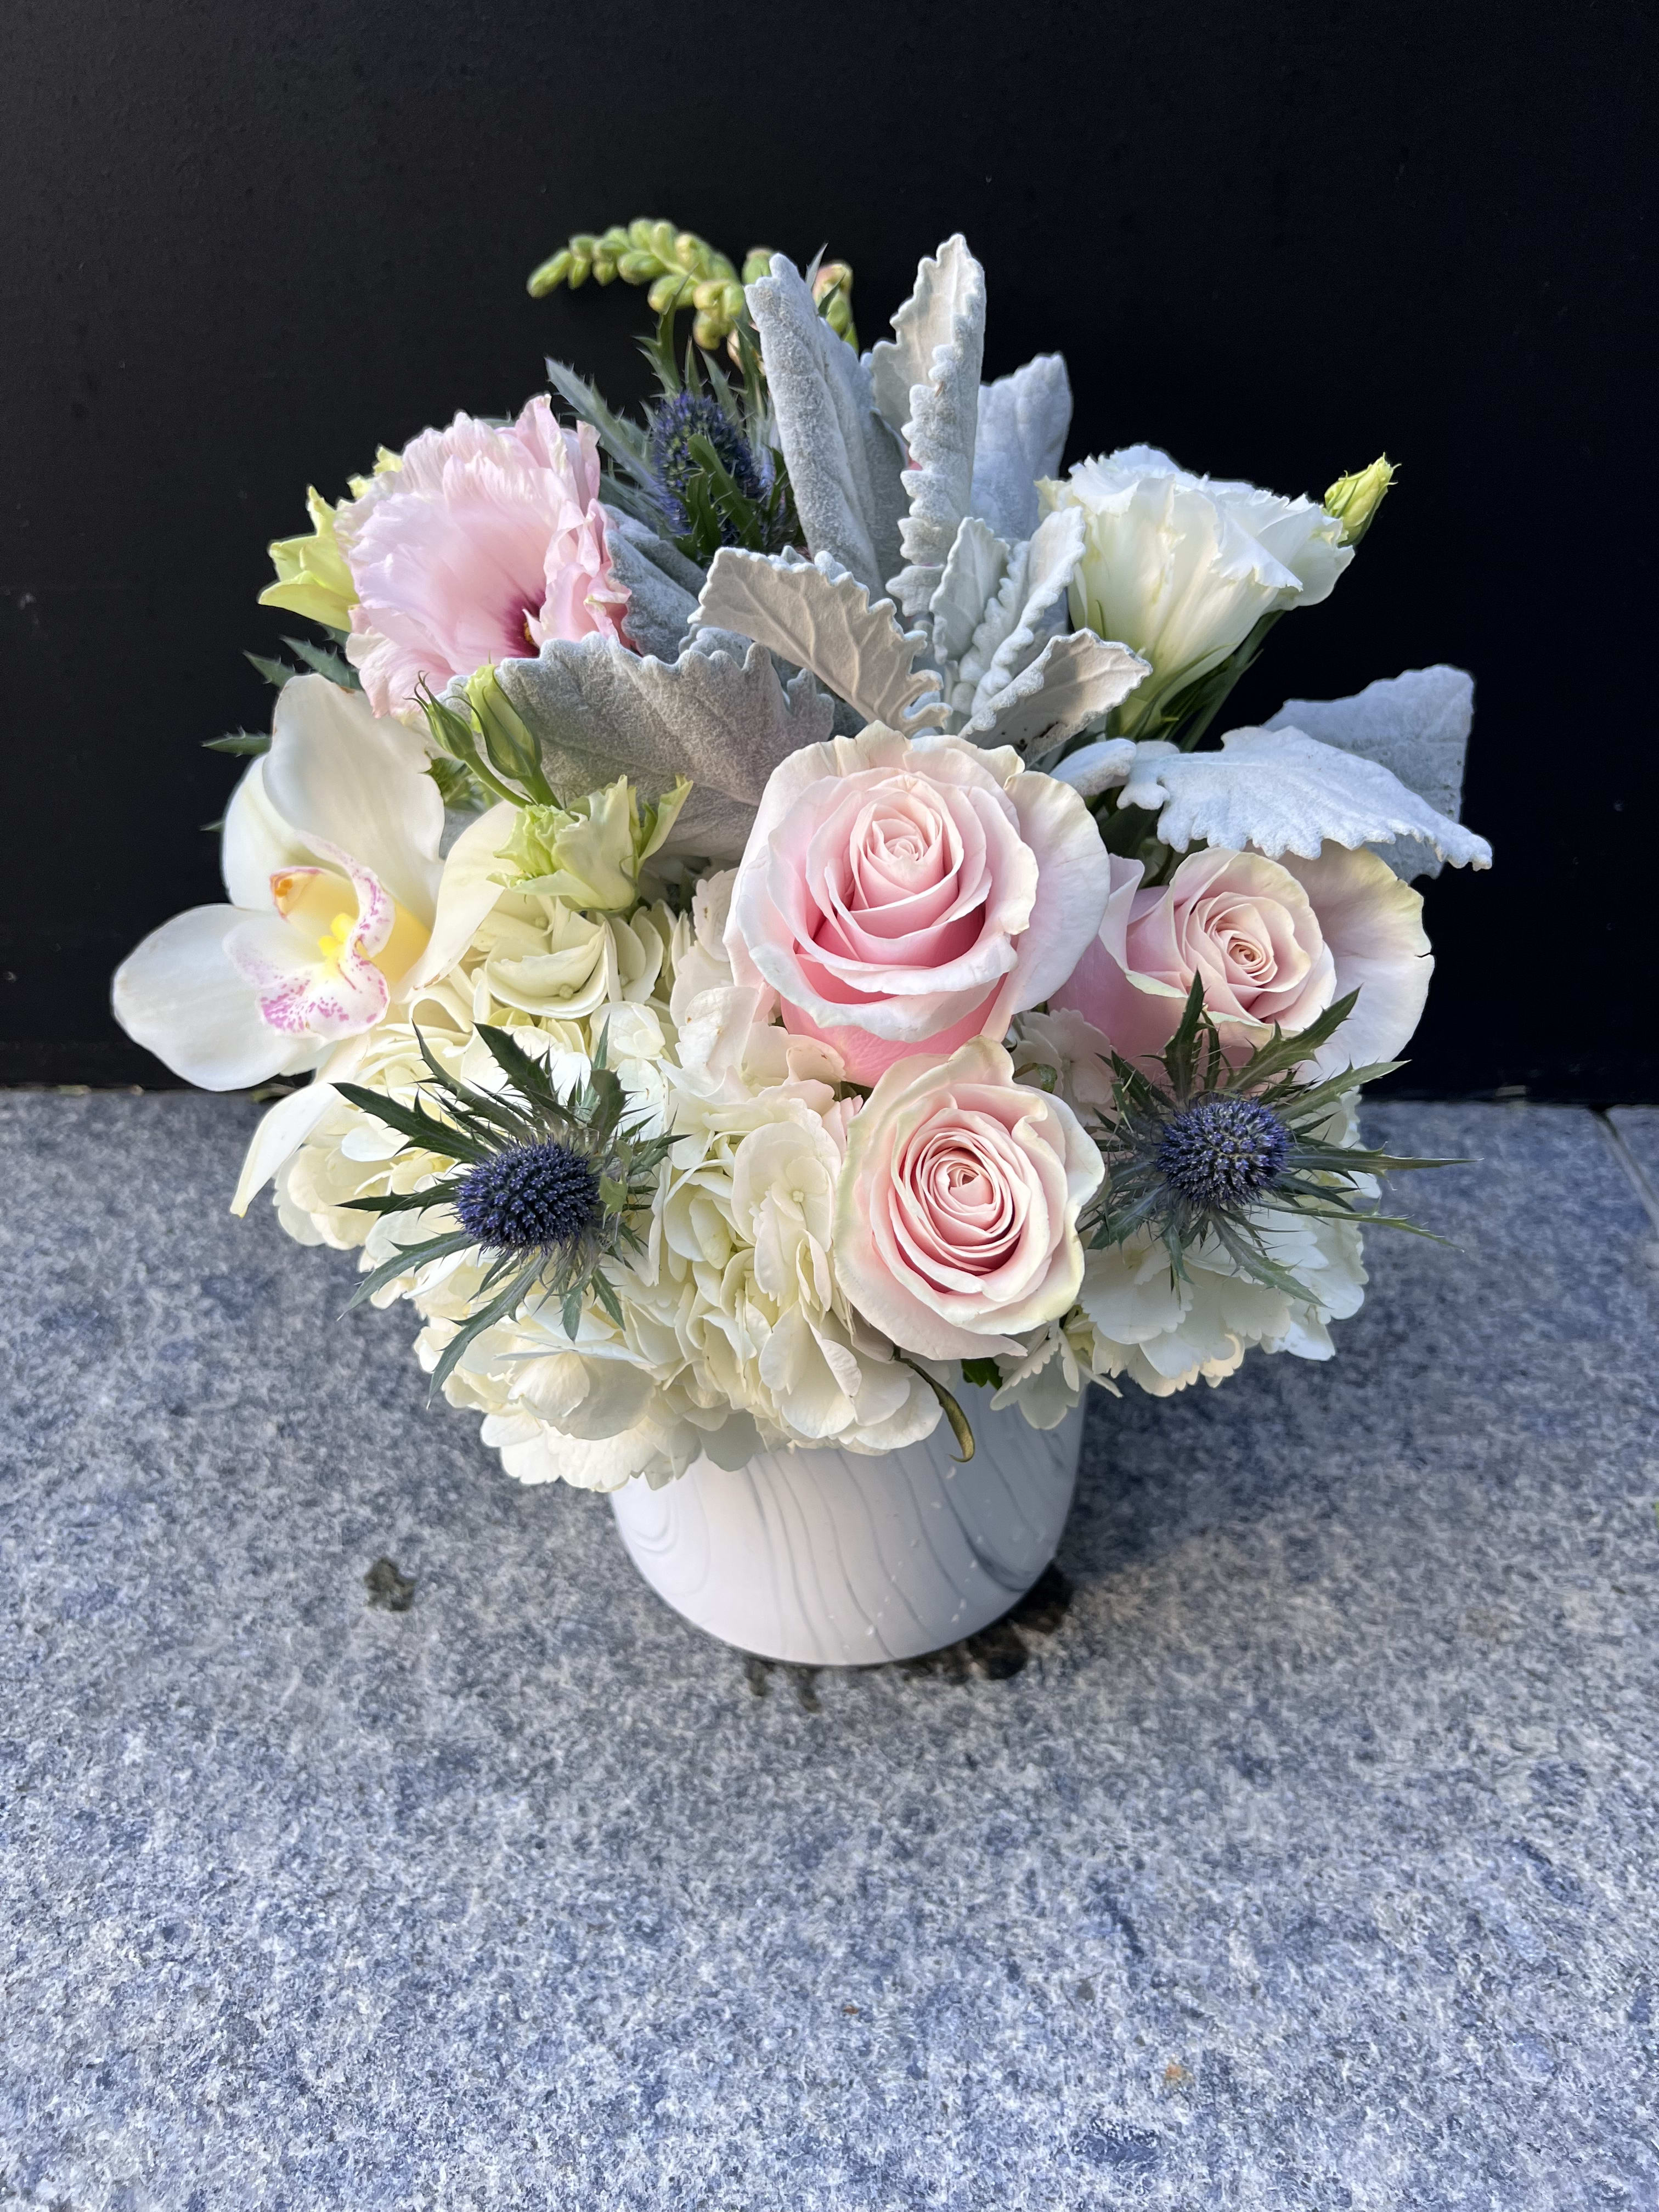 Radiant Beauty  - Radiant Beauty is a full arrangement featuring orchids, lilies, hydrangeas, roses, and dusty miller flowers. The dusty miller flowers give this design a more rustic appeal. 